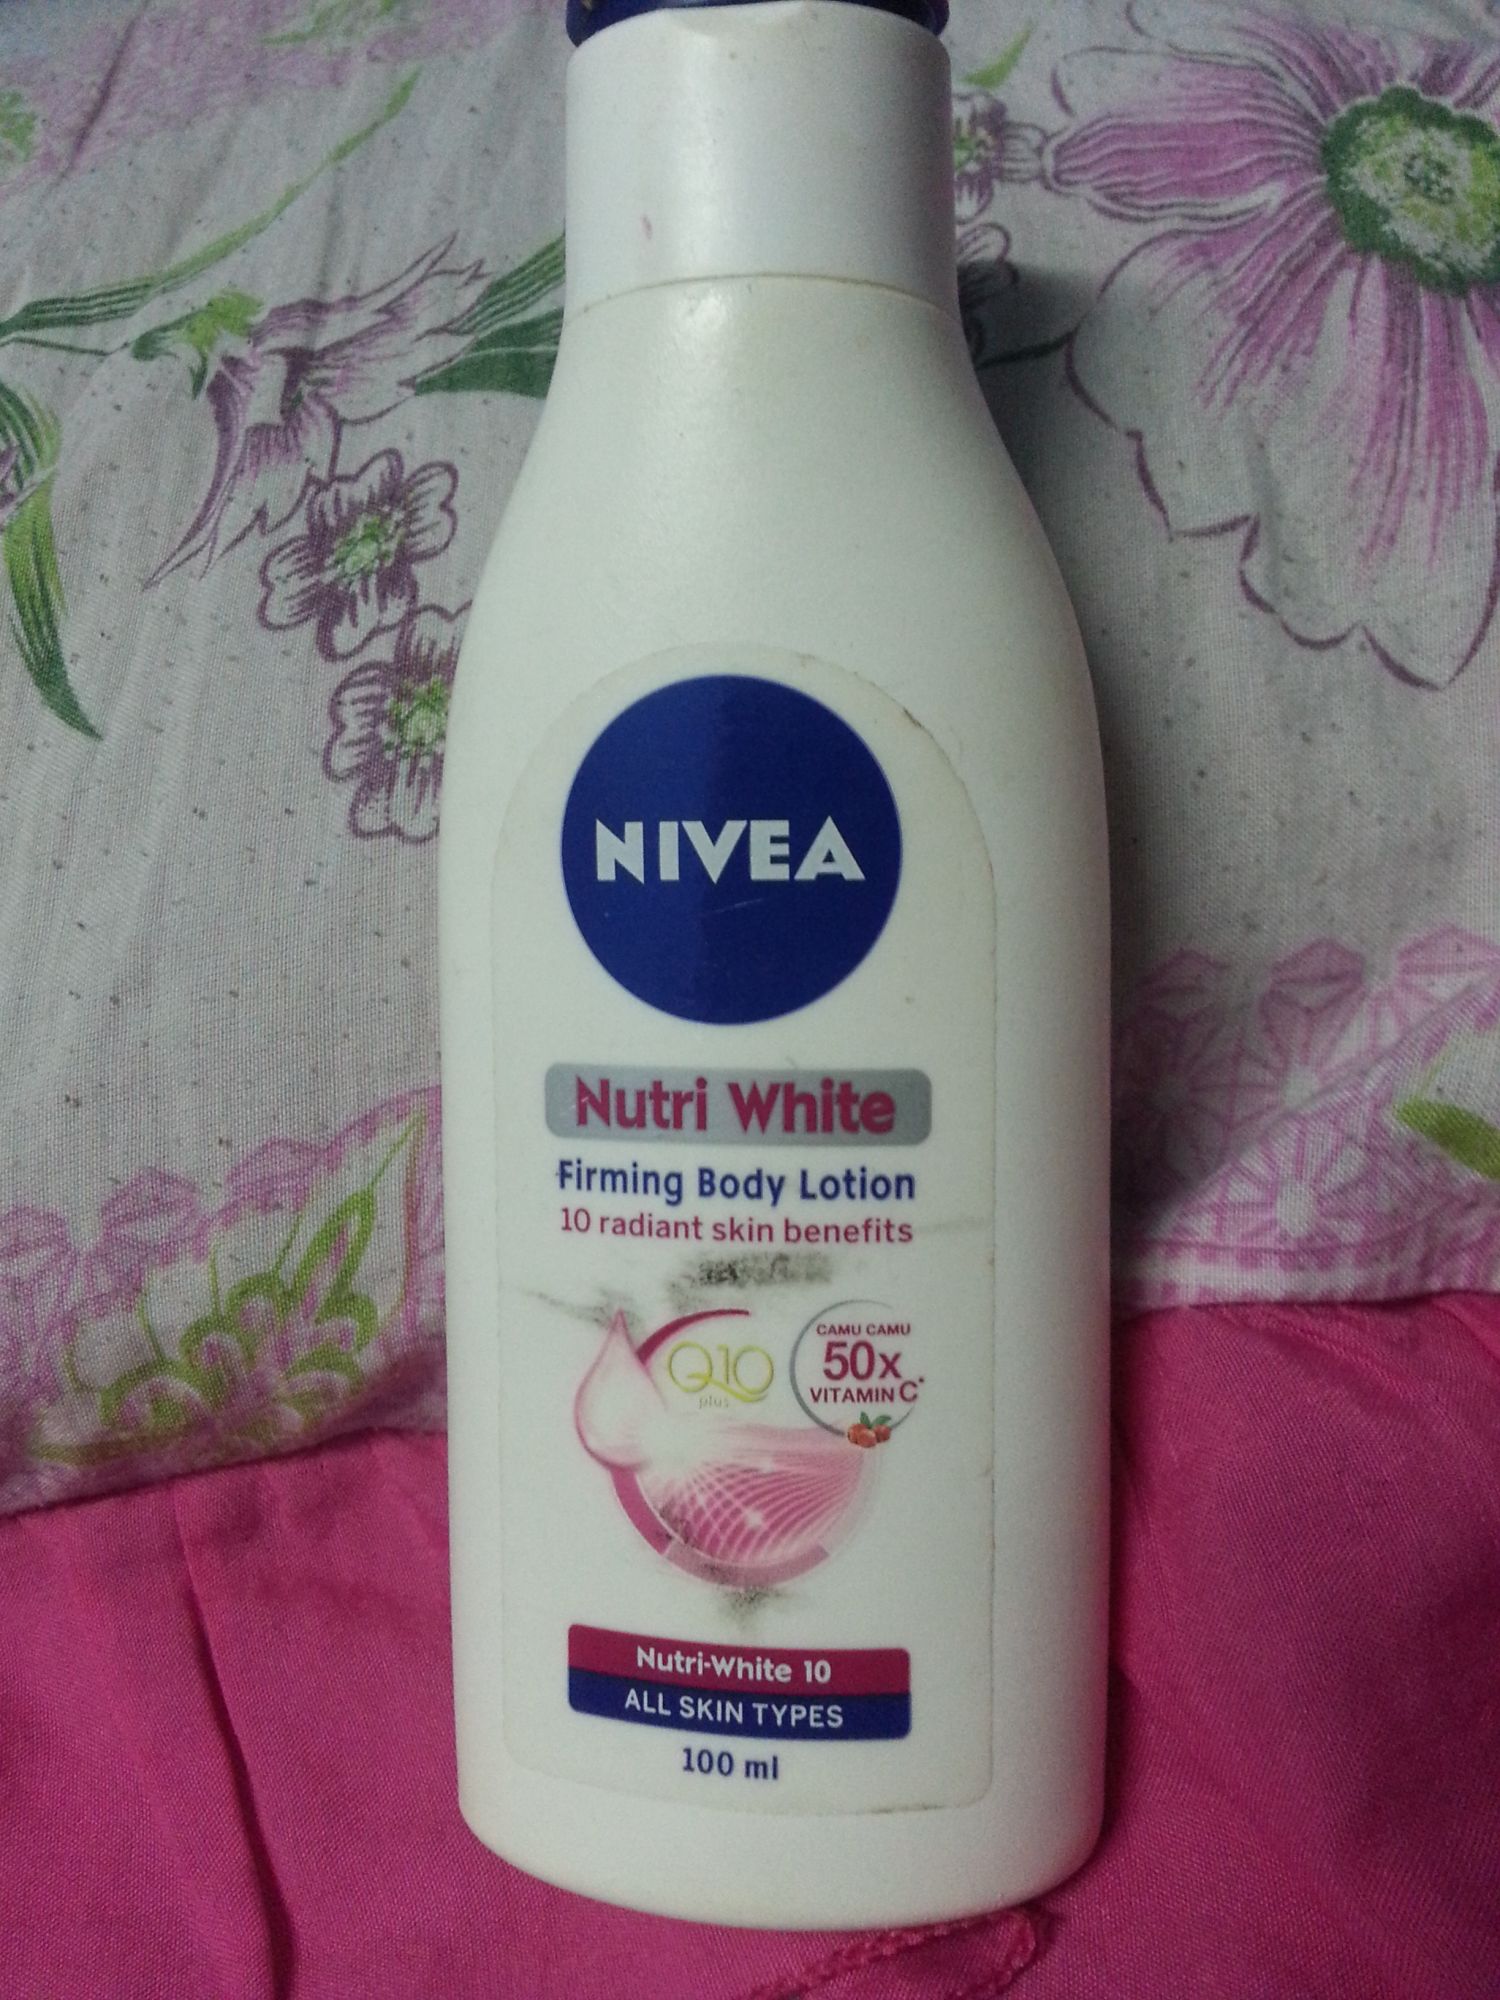  NIVEA  Extra White Firming Body Lotion reviews